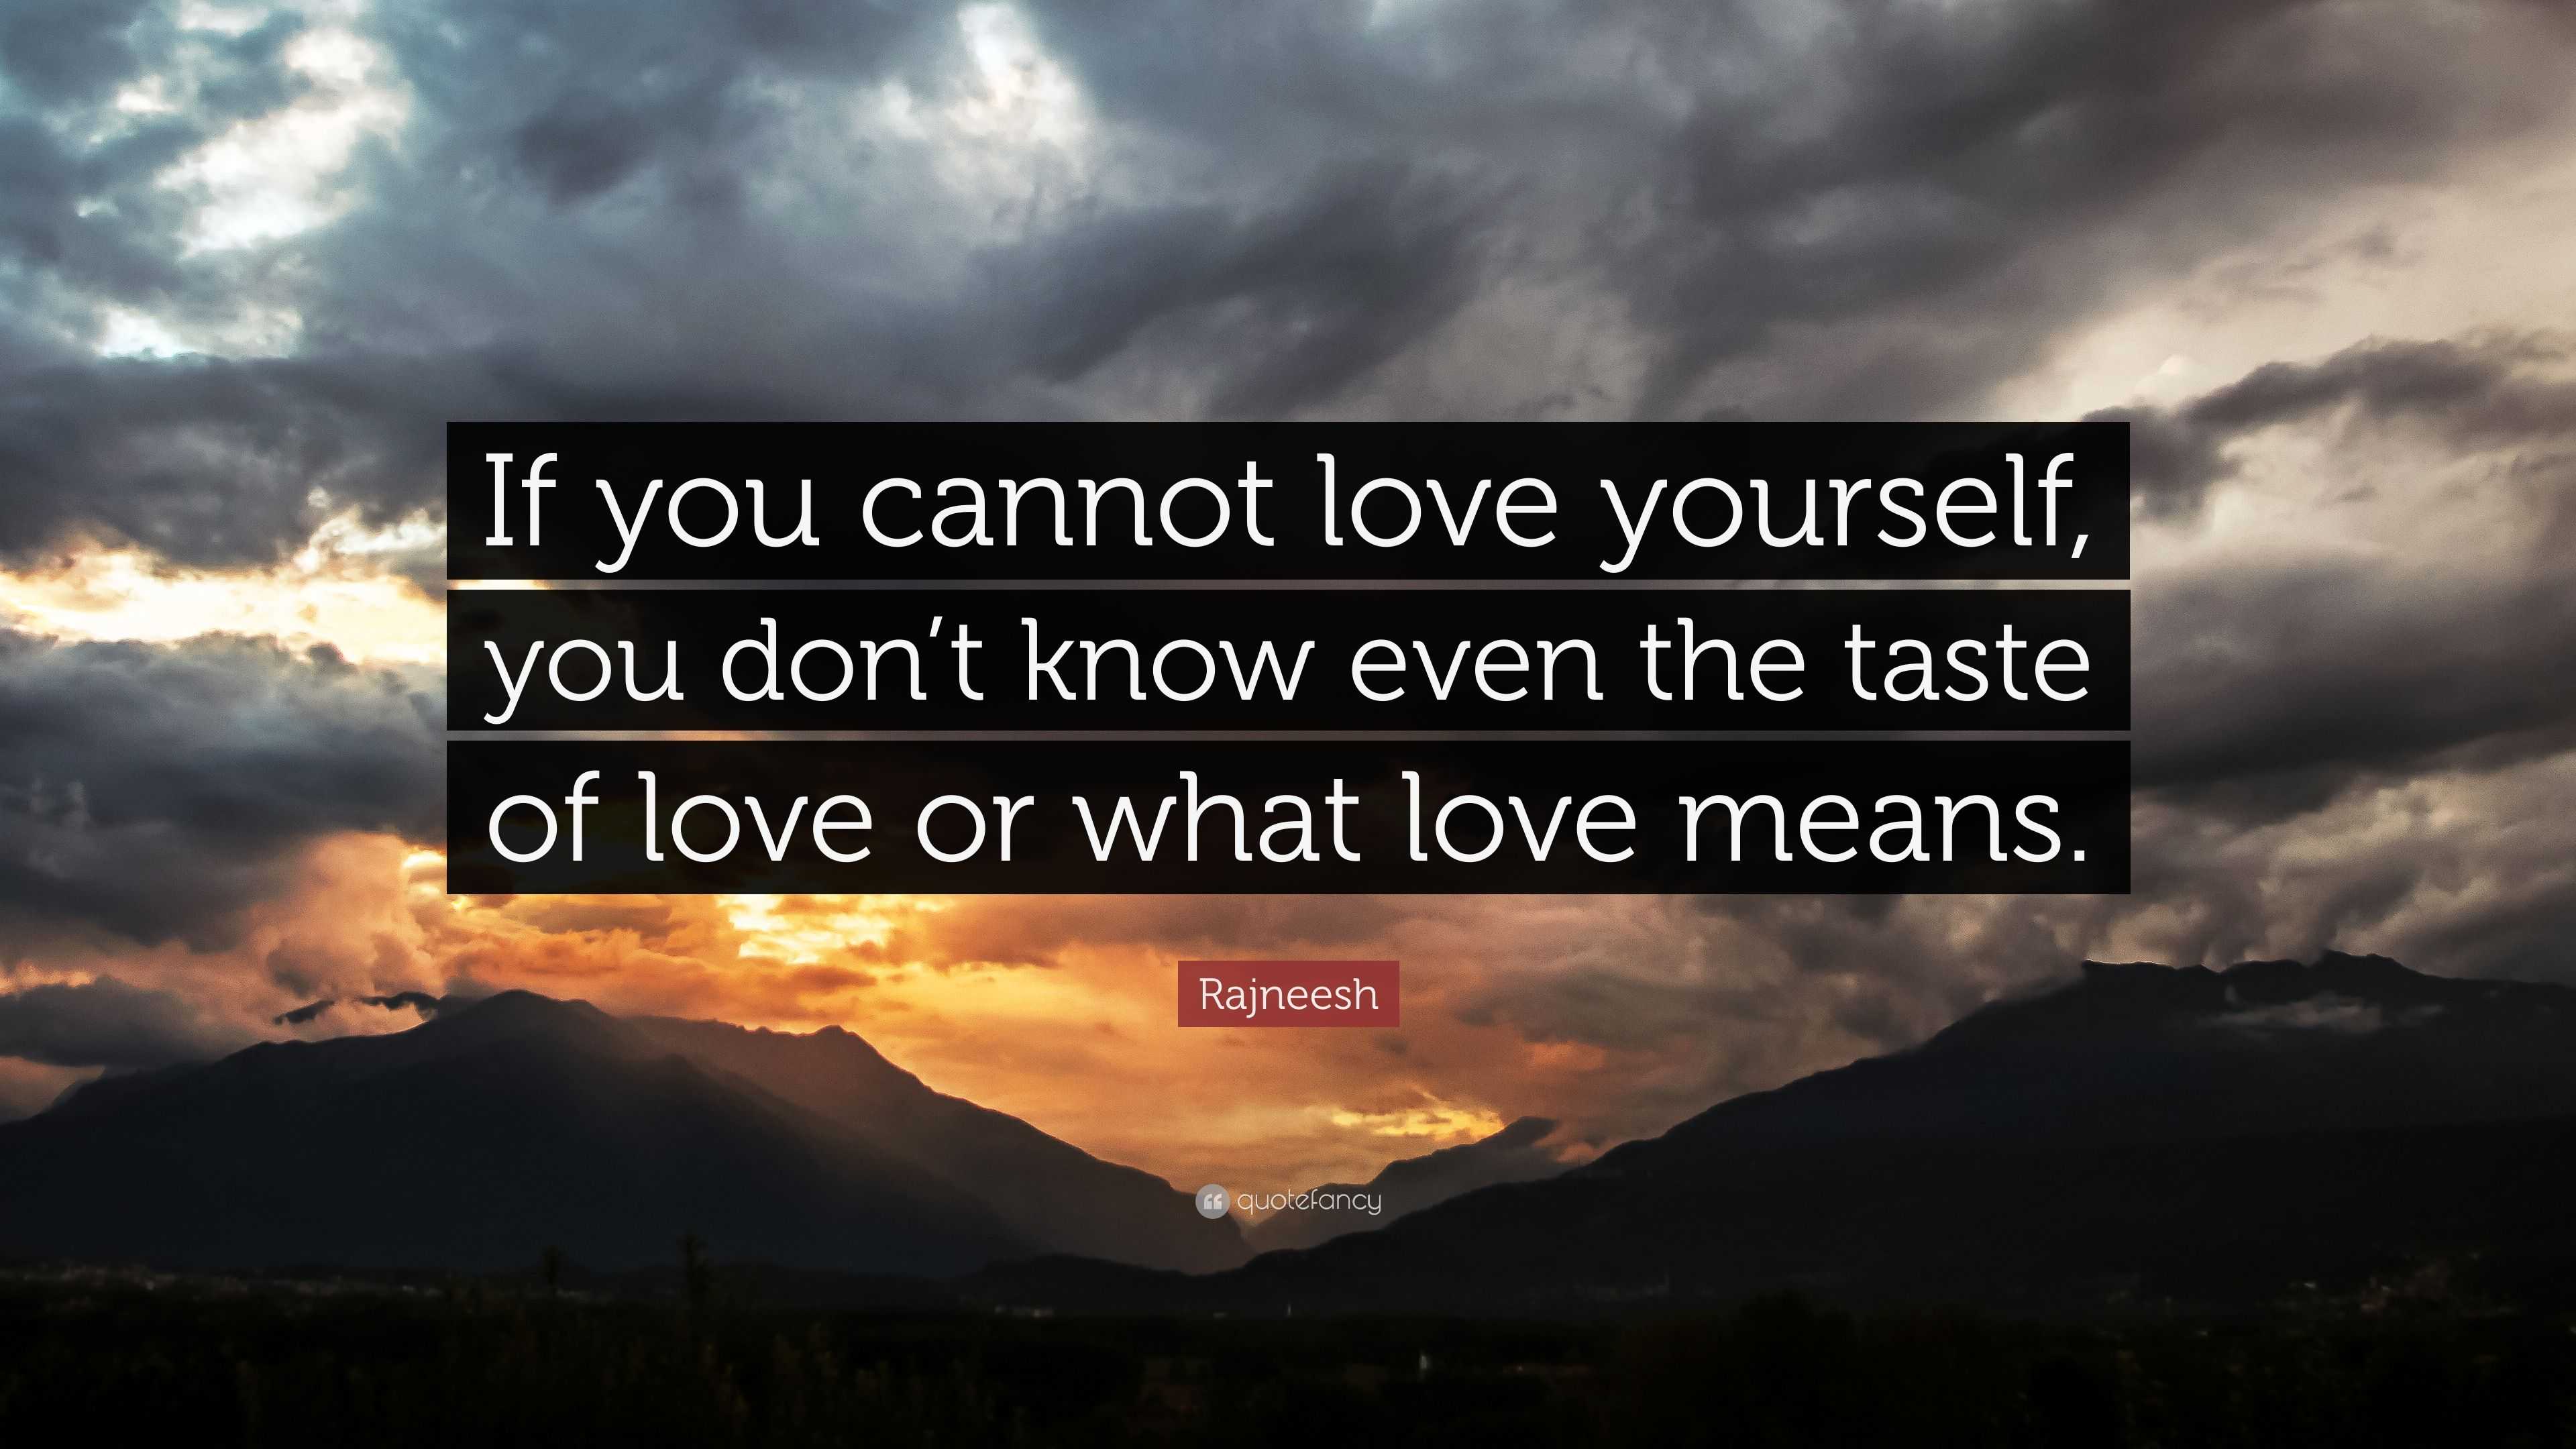 Rajneesh Quote “if You Cannot Love Yourself You Don T Know Even The Taste Of Love Or What Love